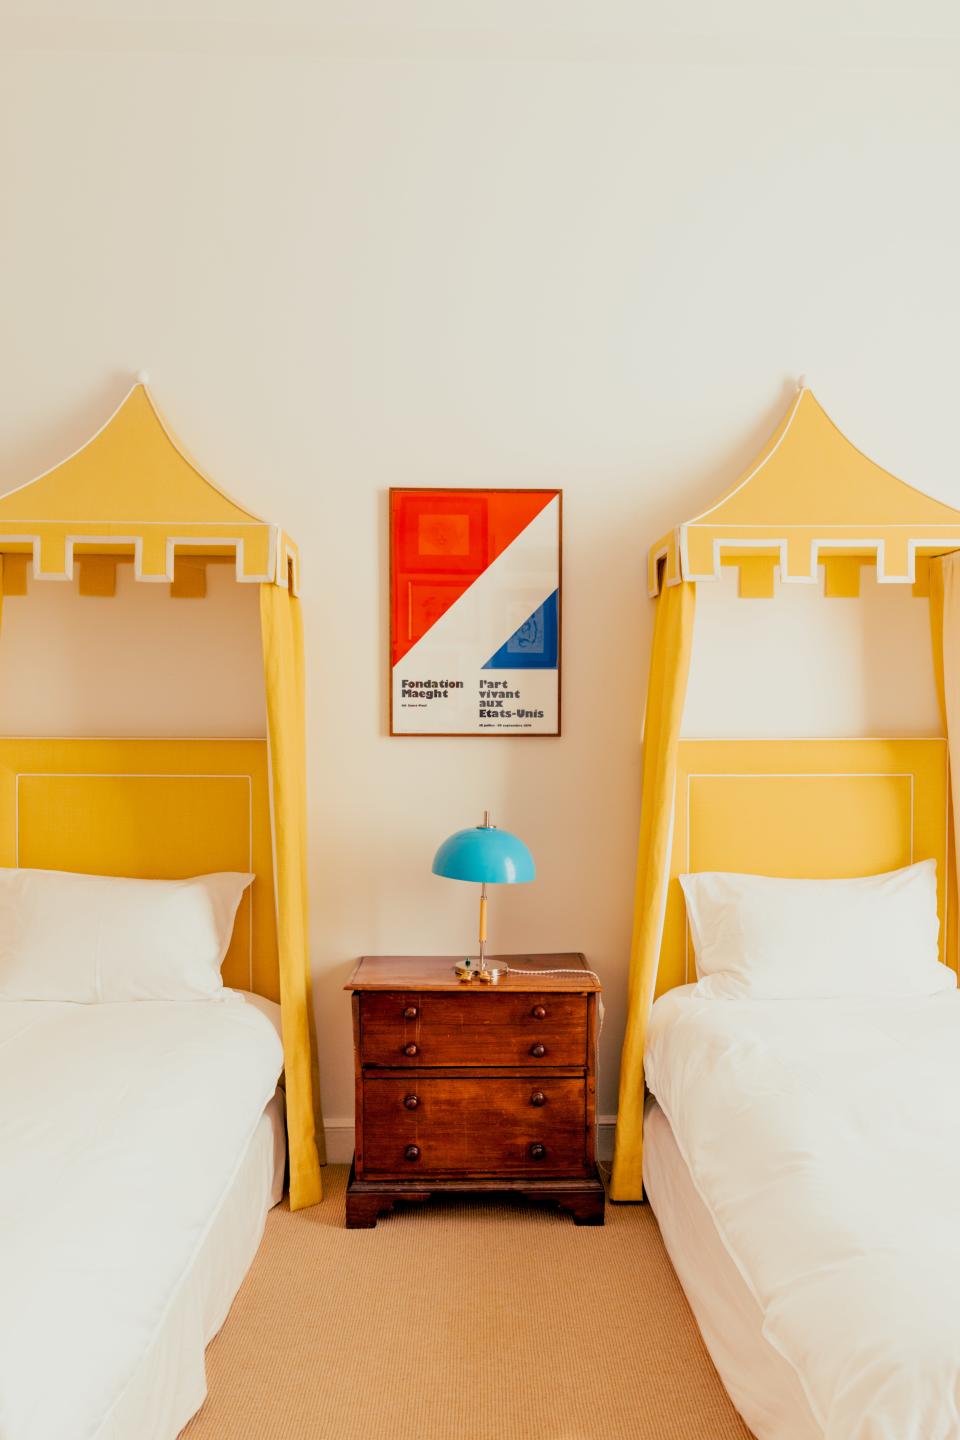 In the children's bedroom, the custom headboards and canopies are made of a Pierre Frey fabric. A 1950s table lamp sits atop a 19th-century English side table.